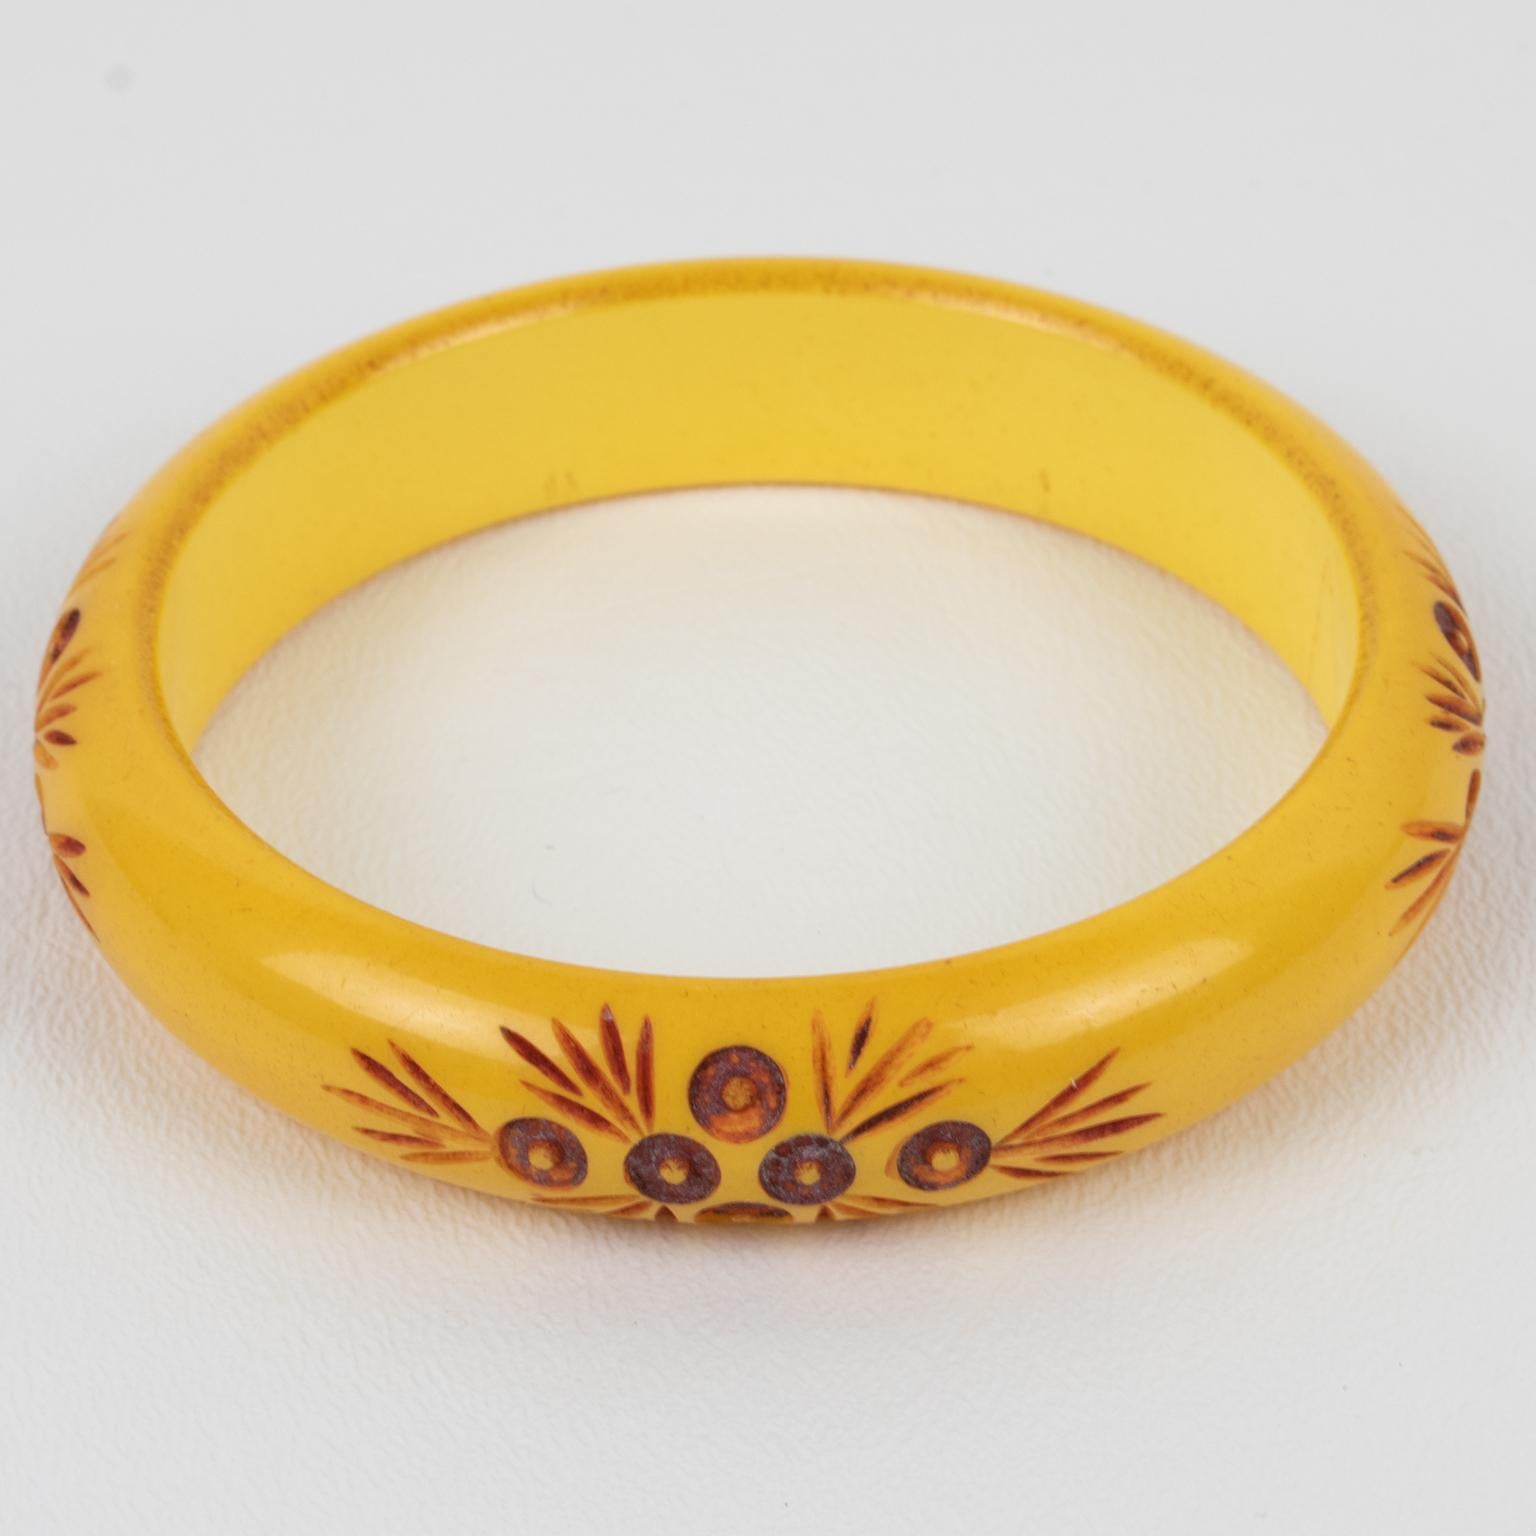 This lovely Bakelite bracelet bangle boasts a chunky domed shape with stylized floral carving and contrast around it. The bangle color has an intense yellow creamed corn contrasted with red paint application in the design. There is no visible